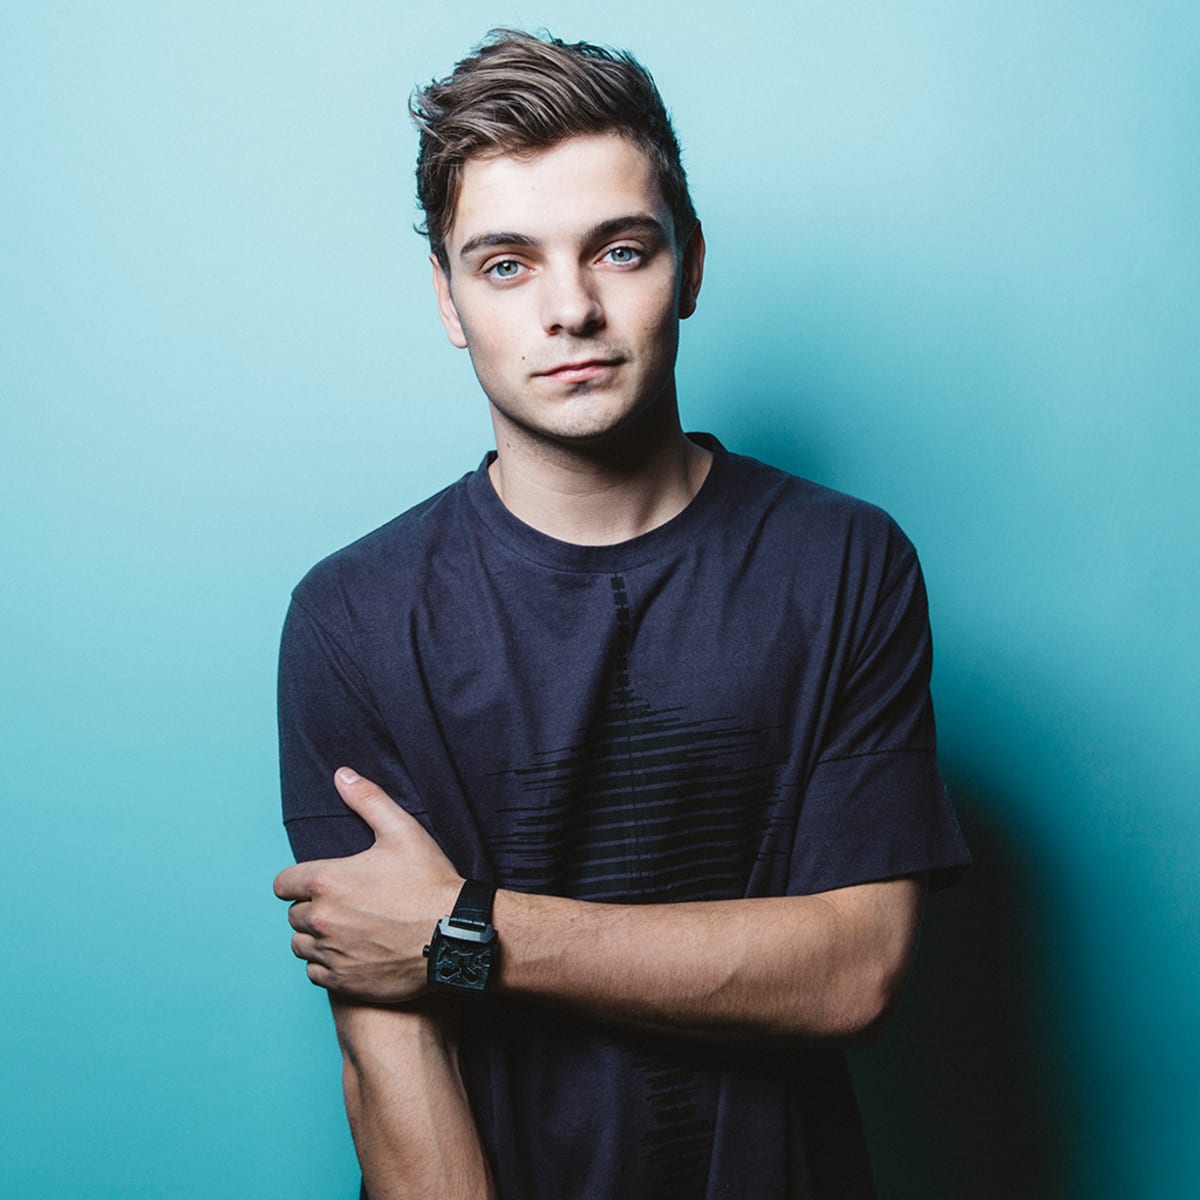 Spinnin' Records Wins Appeal Against Martin Garrix's Lawsuit  -  The Latest Electronic Dance Music News, Reviews & Artists